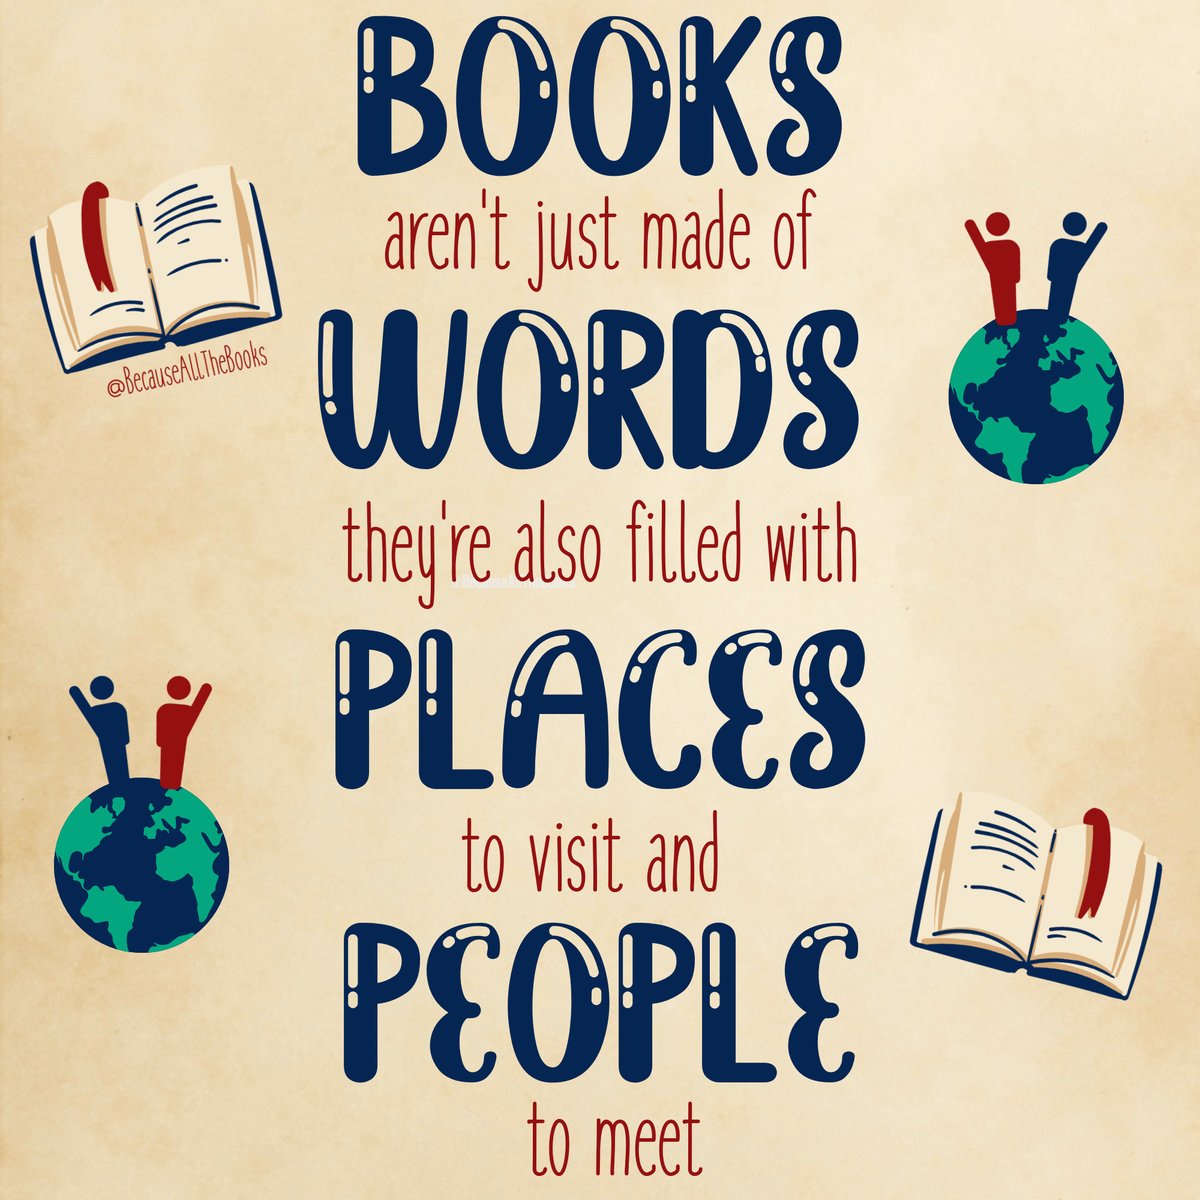 Imagine if you had a log of all the characters you've met and places you've visited in books!

#BecauseAllTheBooks #BookTravel #BookEscape #BookAdventure #ReadingAdventure